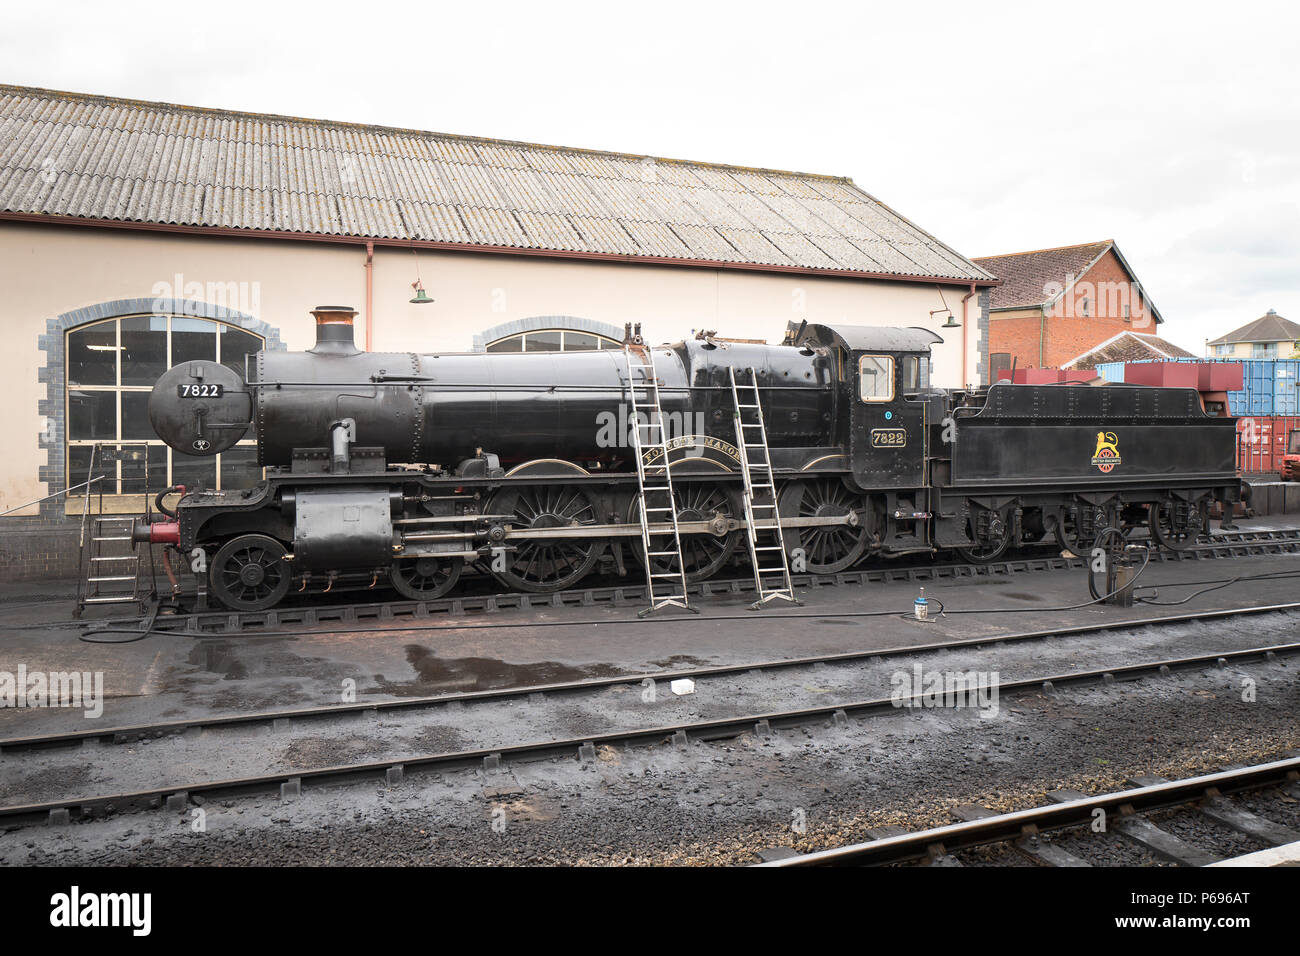 No 7822 Ex-GWR FOXCOTE MANOR undergoing maintenance at Minehead on the West Somerset Railway in the UK Stock Photo